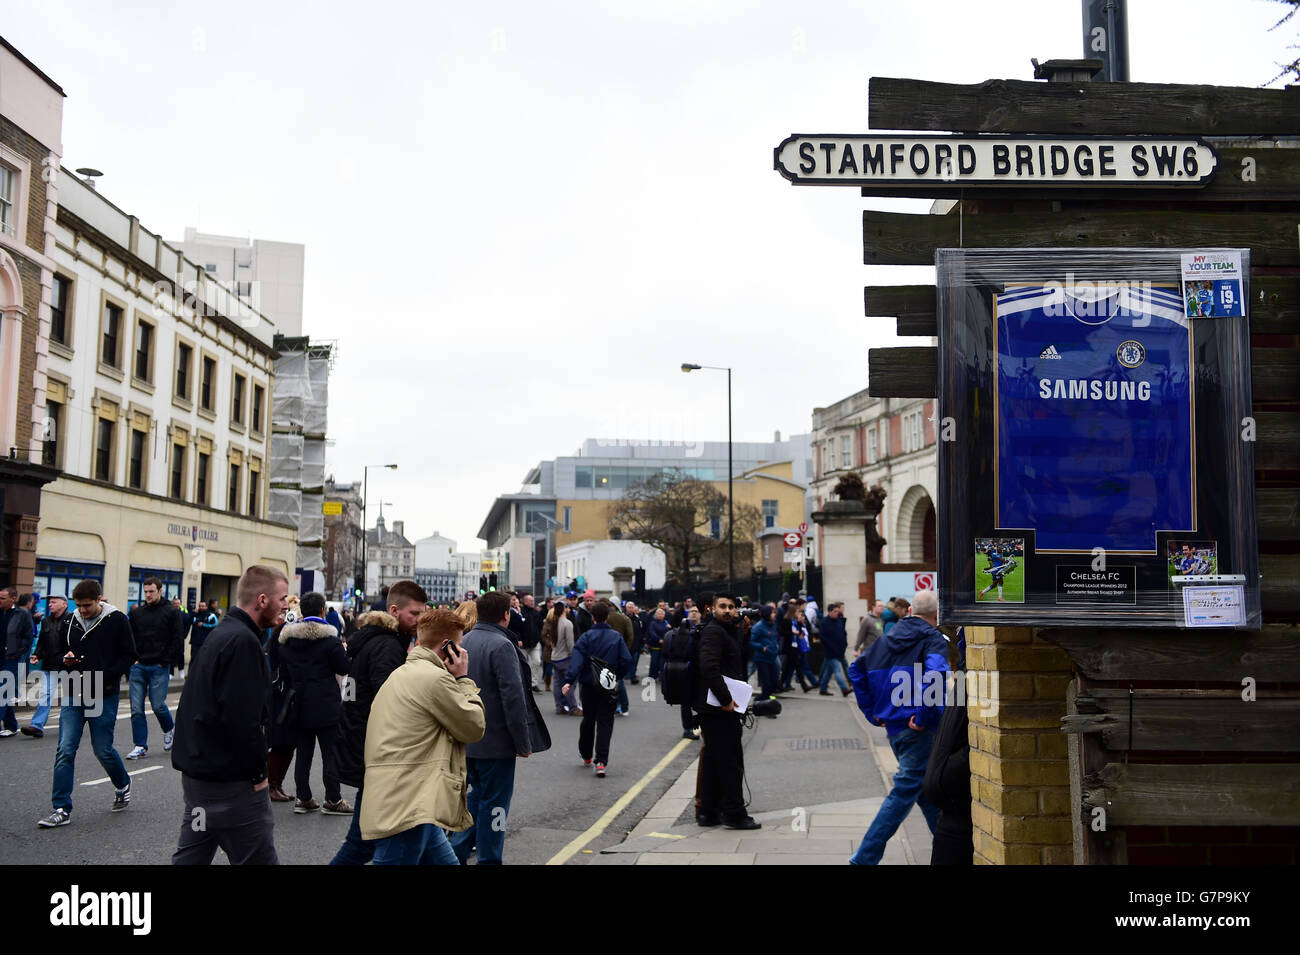 A Stamford Bridge street sign prior to the Barclays Premier League match at Stamford Bridge, London. PRESS ASSOCIATION Photo. Picture date: Sunday March 15, 2015. See PA story SOCCER Chelsea. Photo credit should read: Adam Davy/PA Wire. Stock Photo